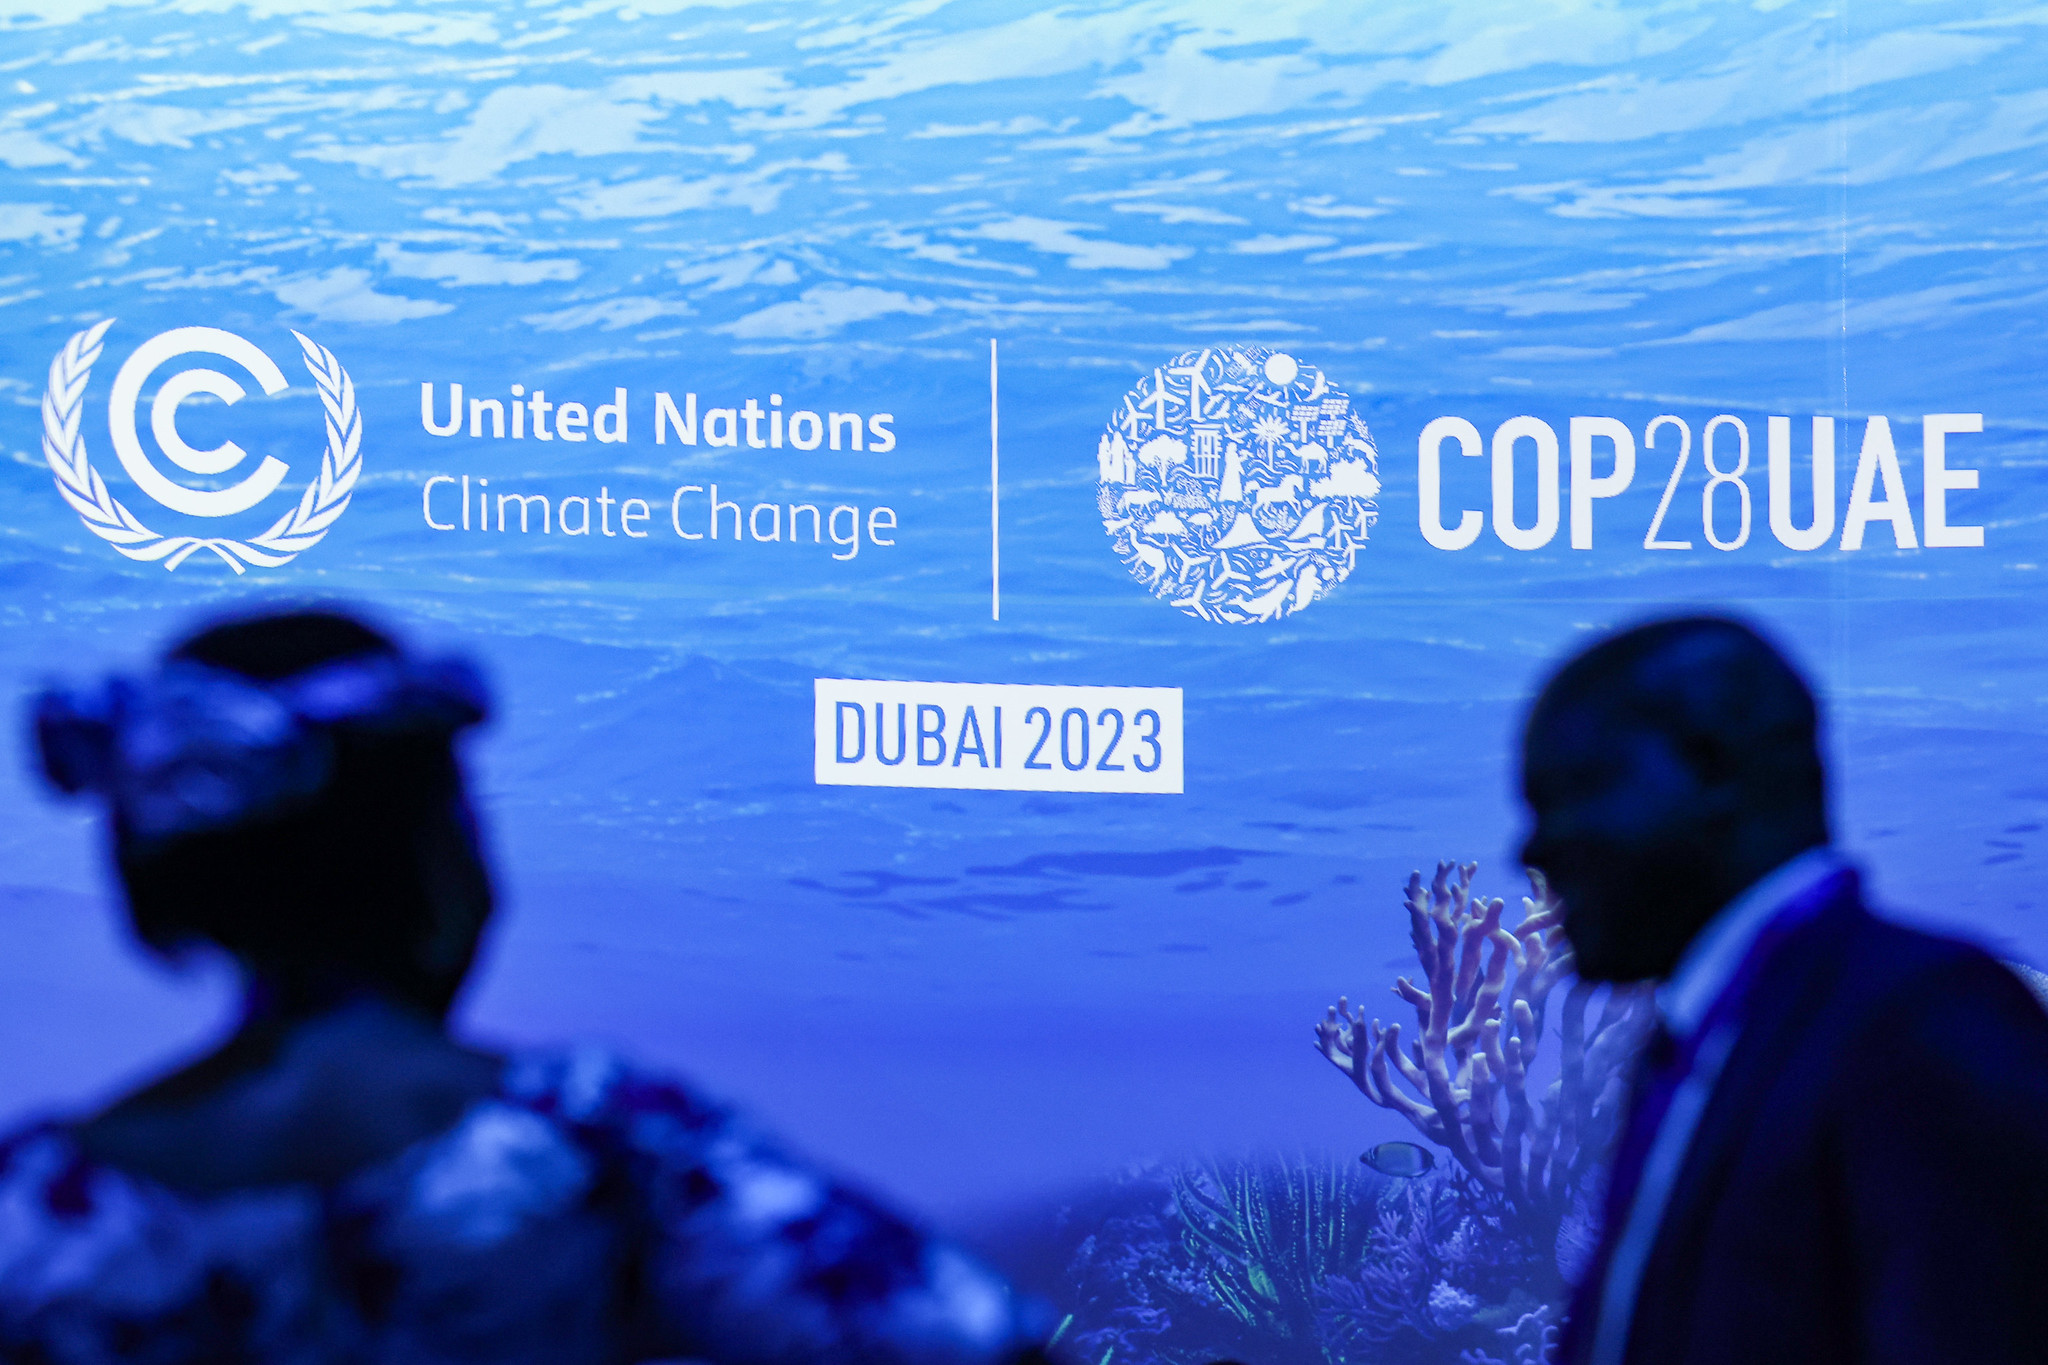 The COP28 logo on a blue sea background with the figures of two people in front